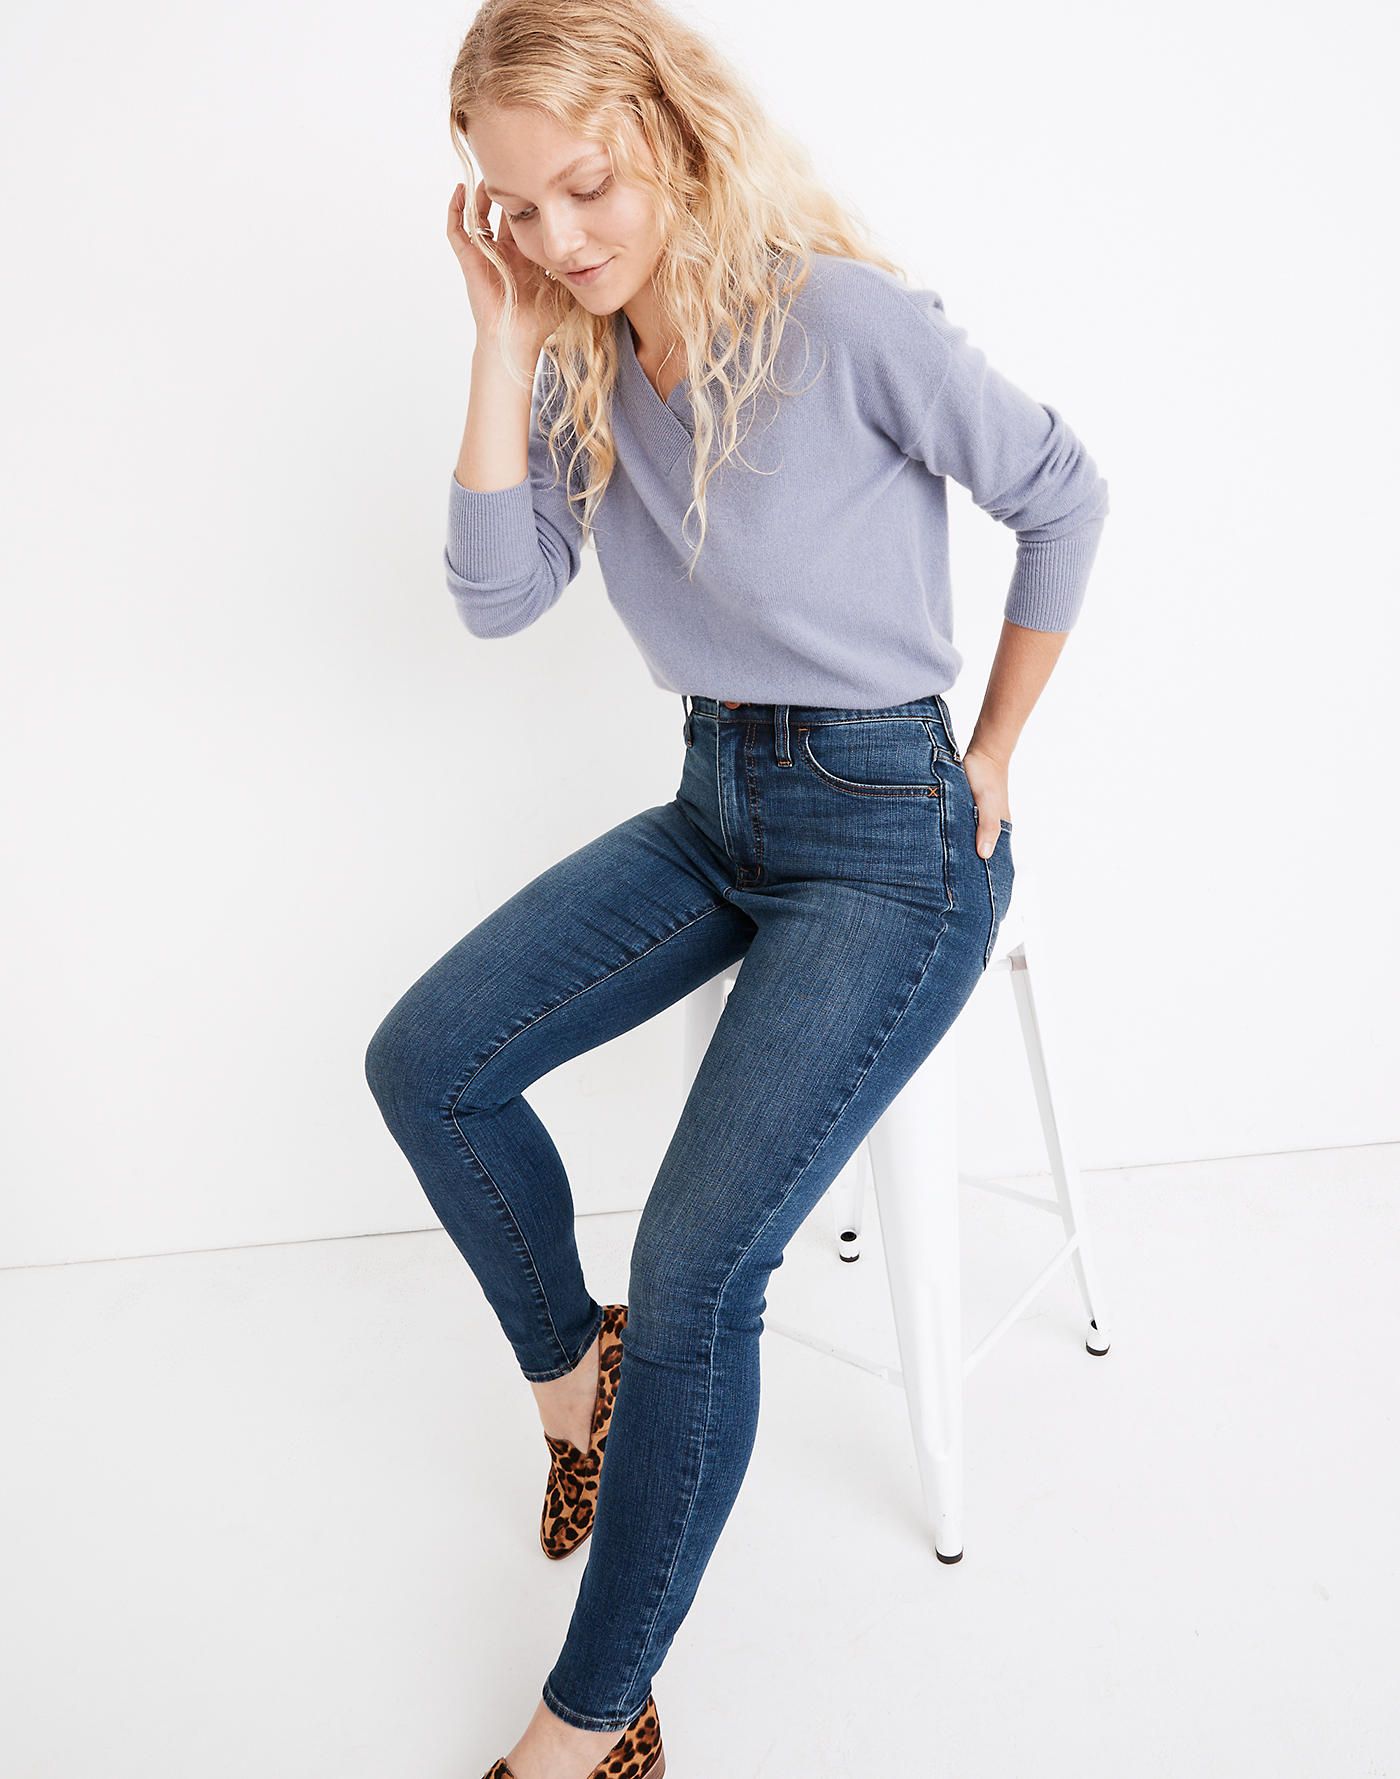 Buy > extra long jeans for ladies > in stock